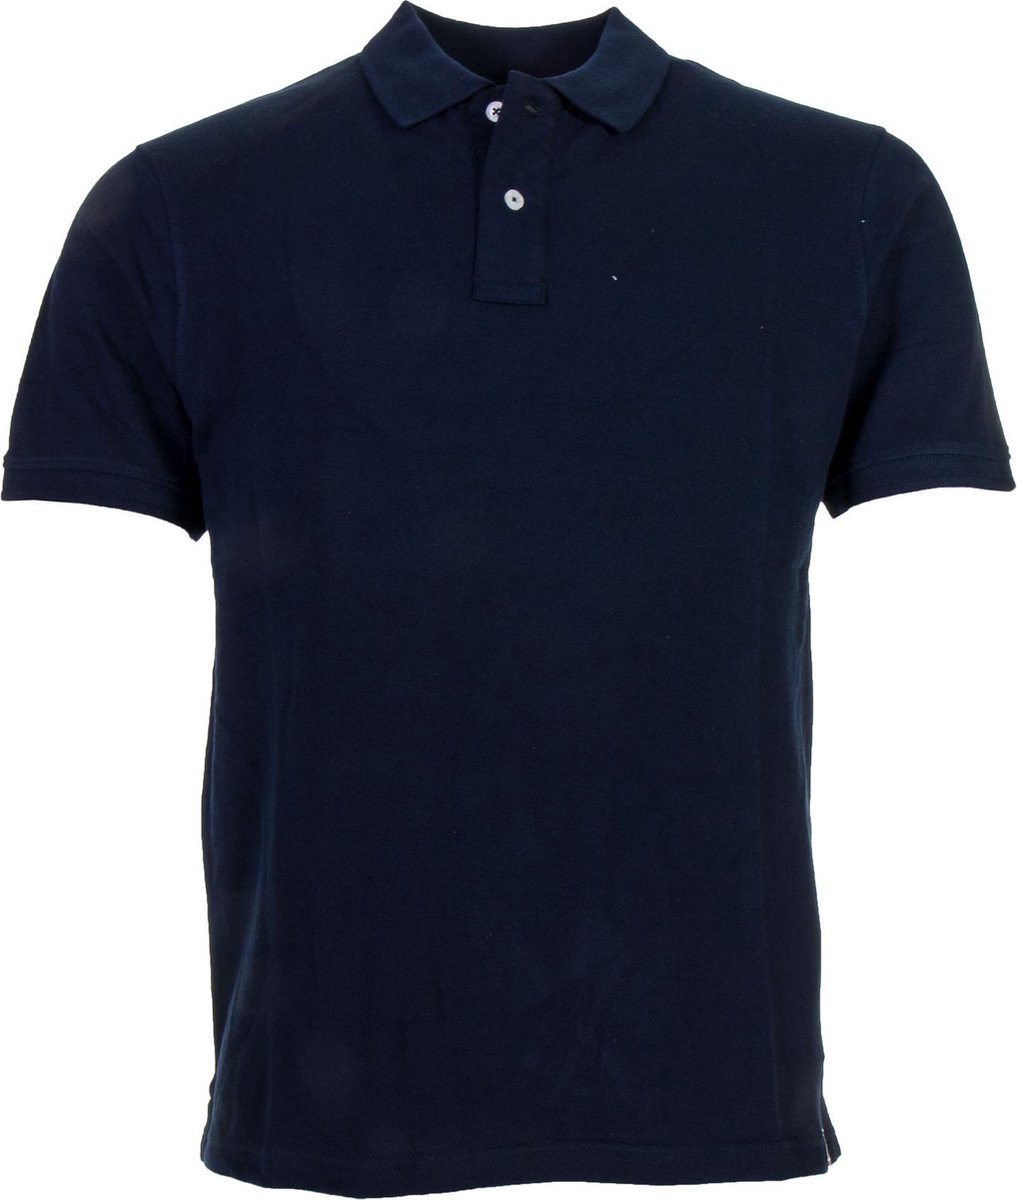 Russell Athletic Classic Polo Heren Sportpolo casual - Maat M - Mannen - blauw